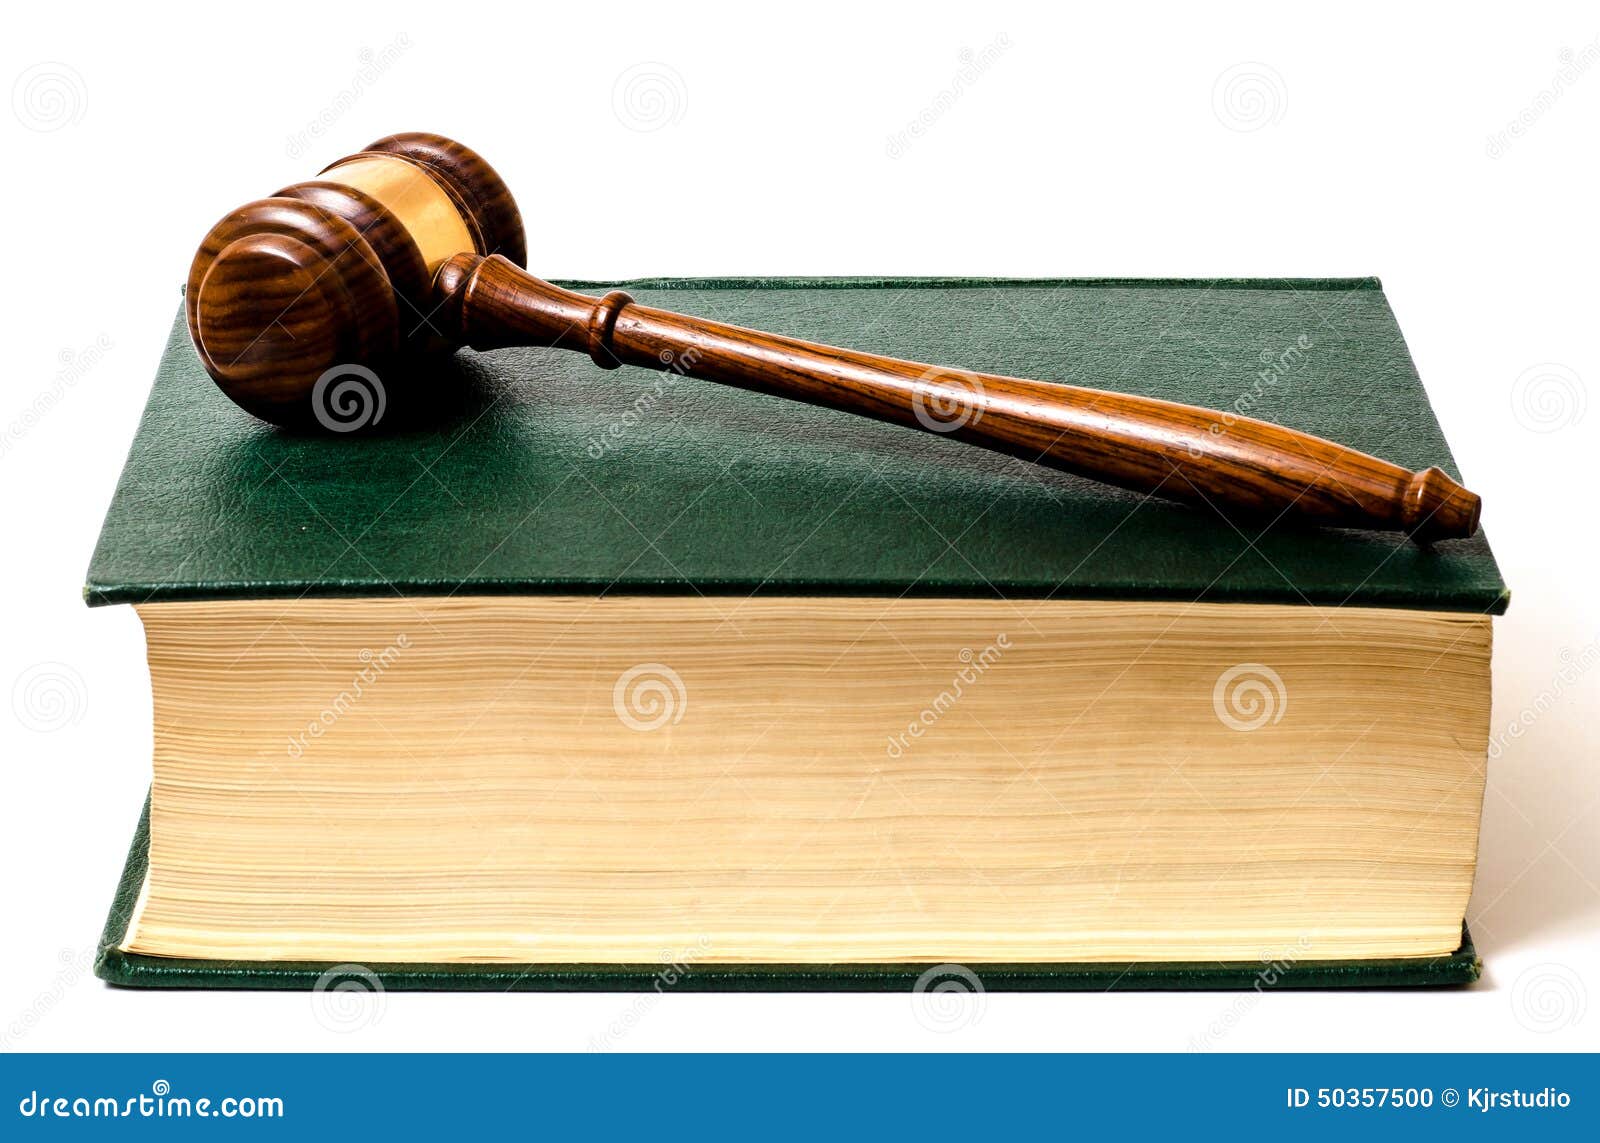 law book with gavel.